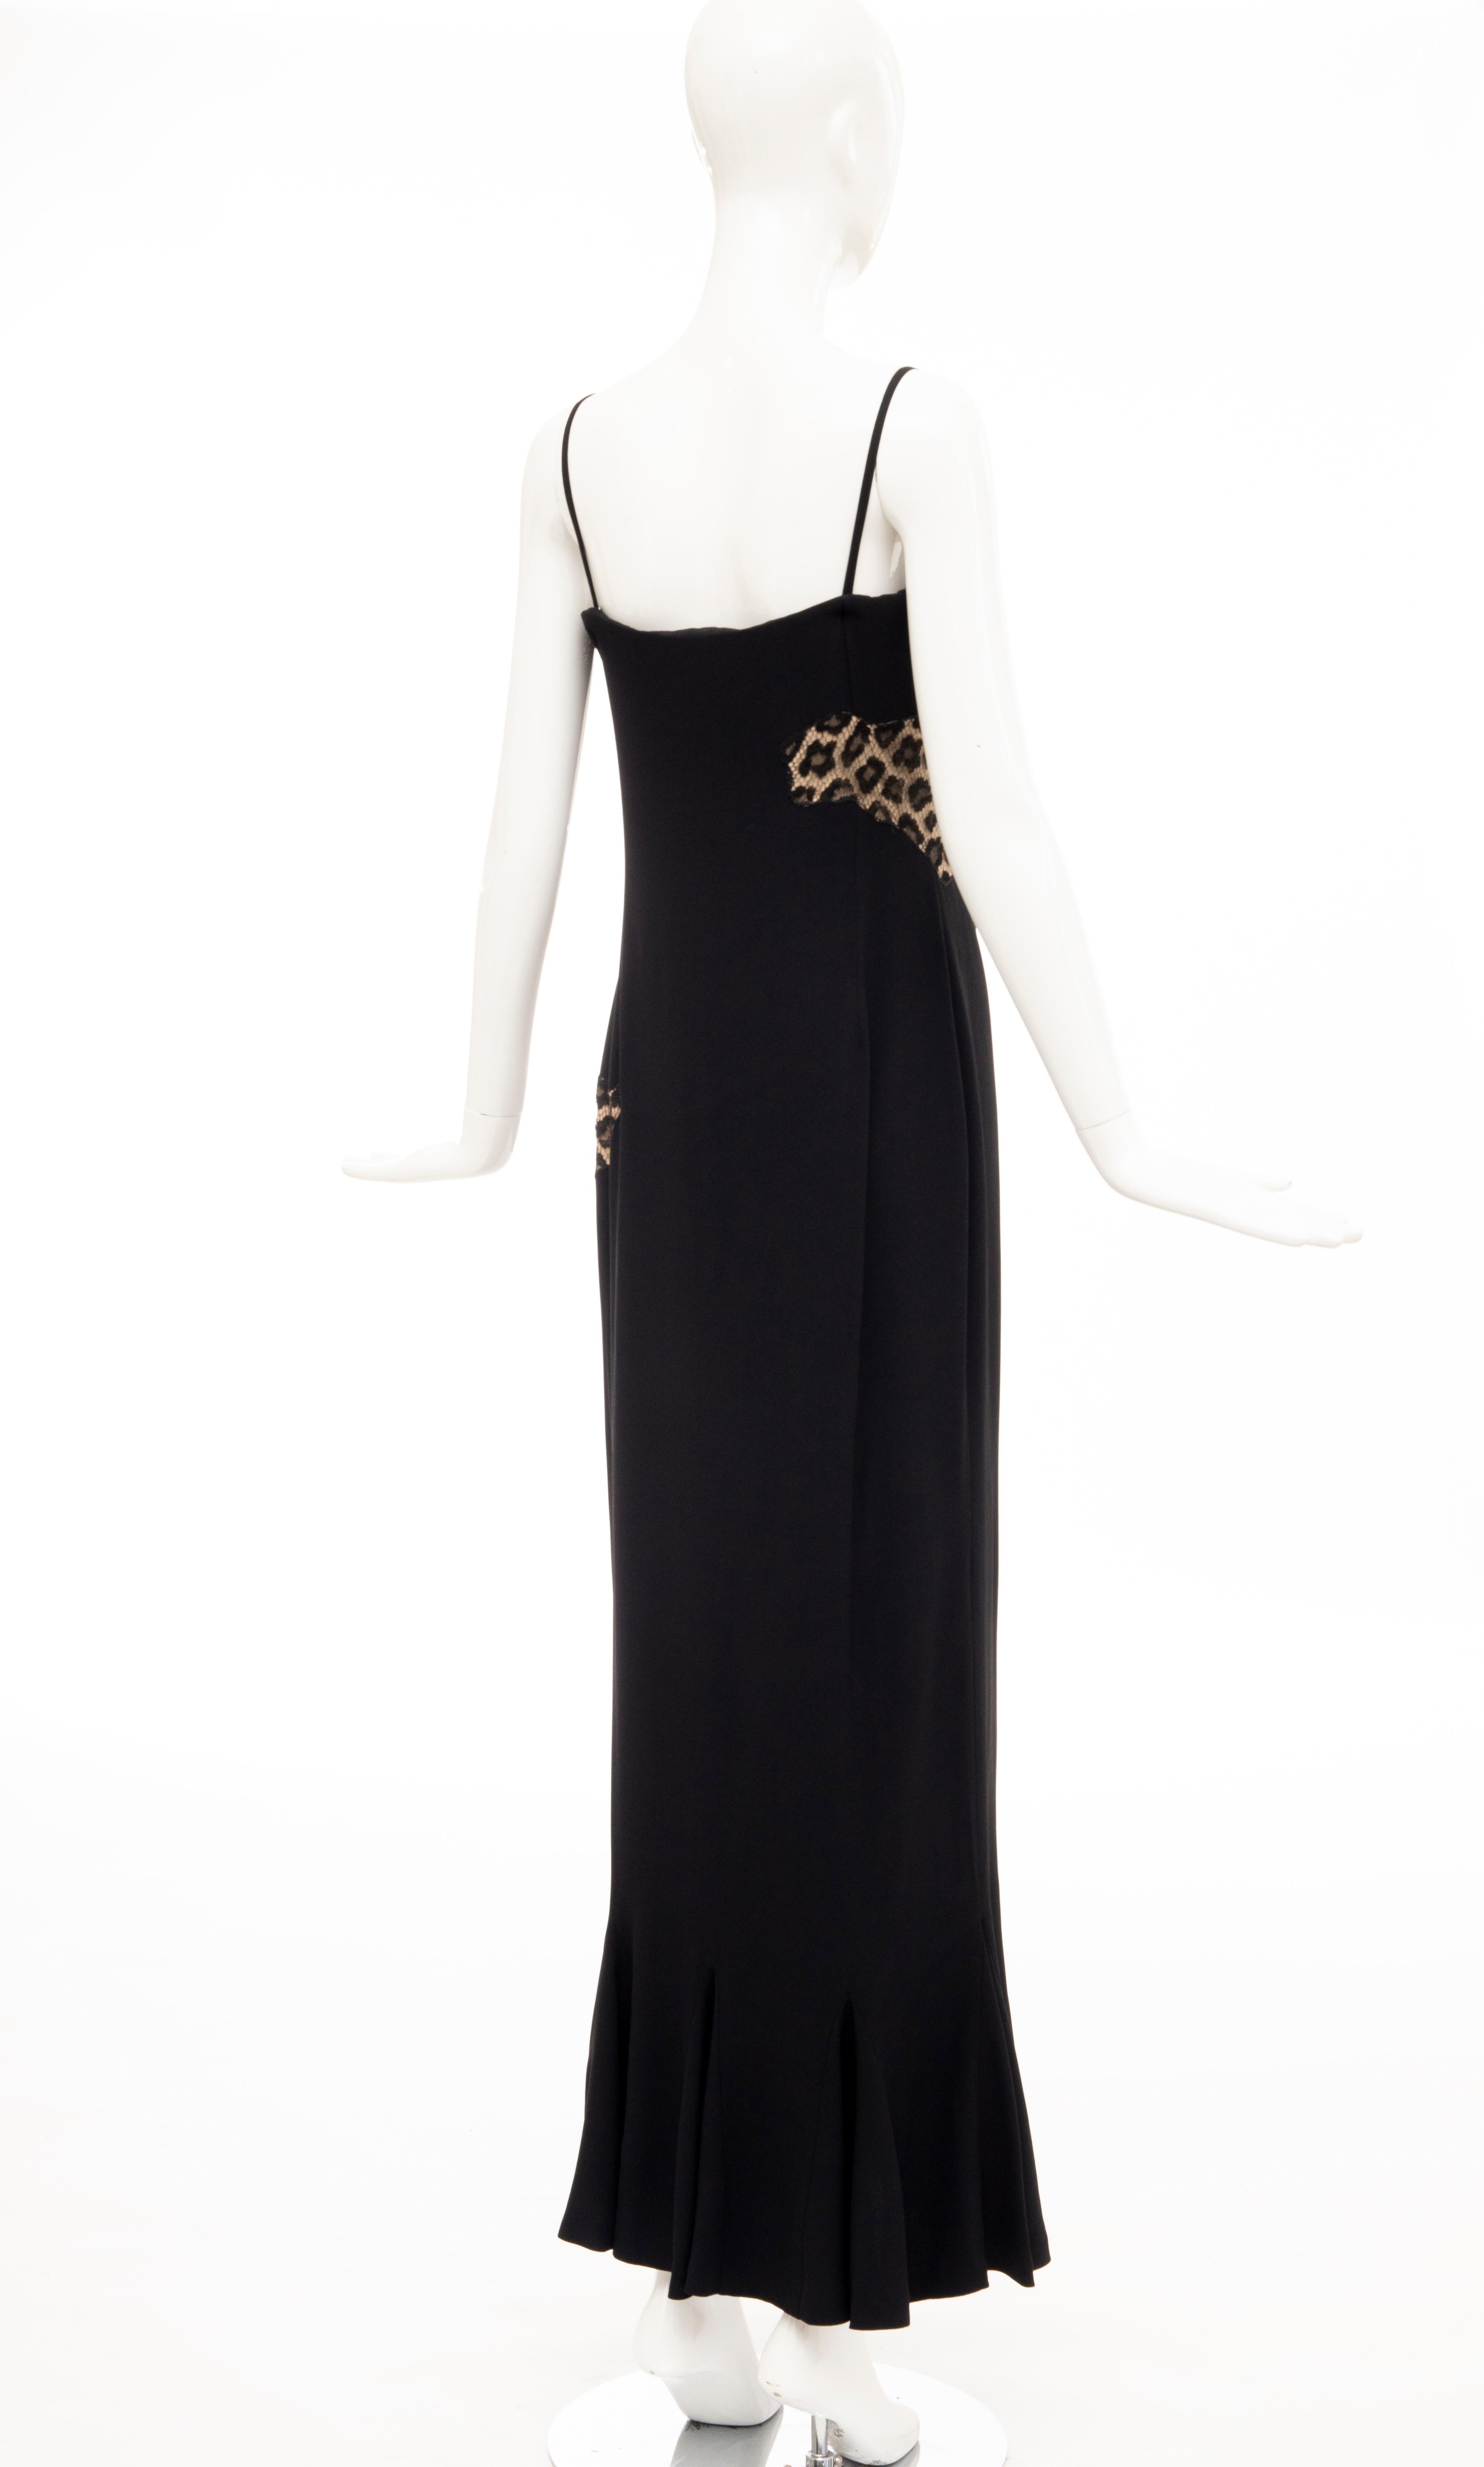 Women's Alexander McQueen Givenchy Couture Black Leopard Lace Evening Dress, Fall 1997 For Sale